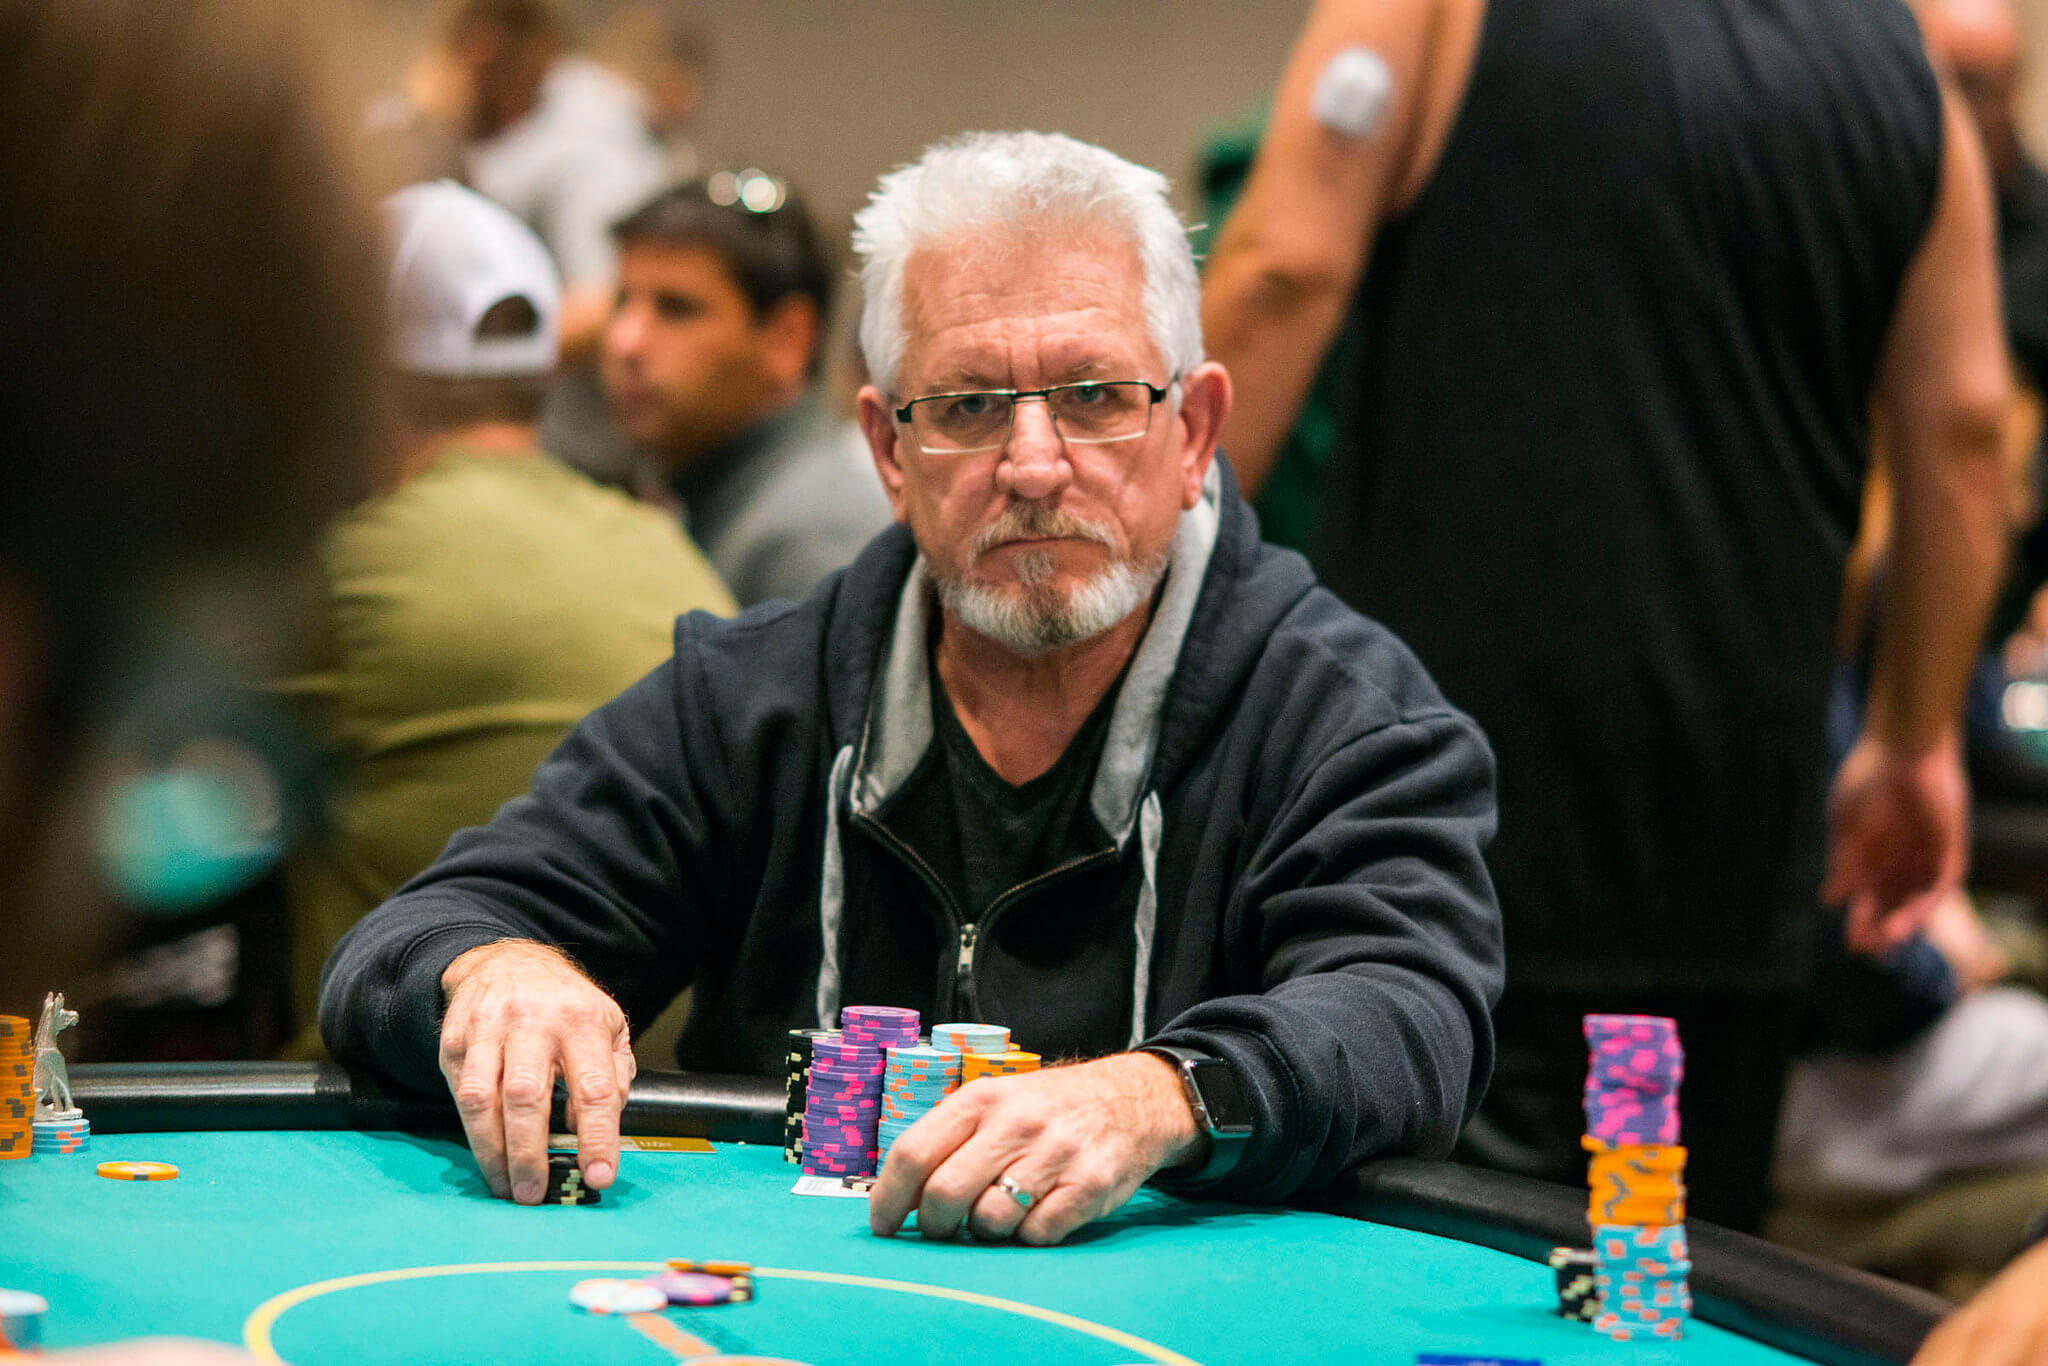 Guy Smith faces two years in prison for failing to pay taxes on $1 Million poker winnings